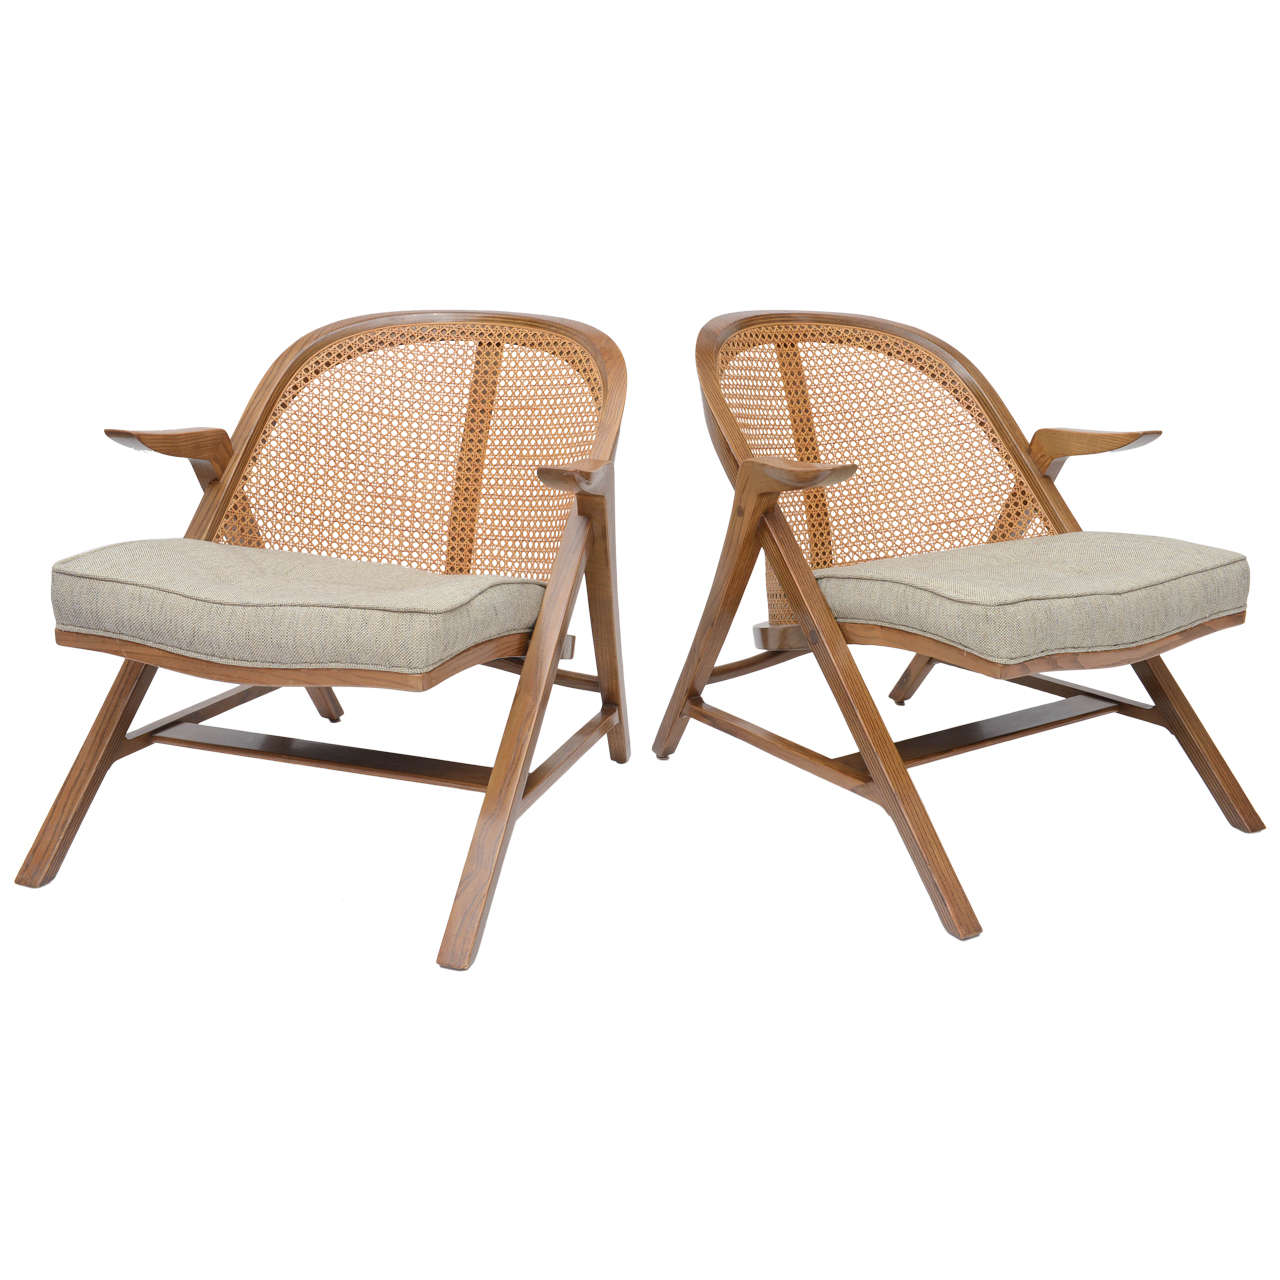 Edward Wormley A-Frame Lounge Chairs